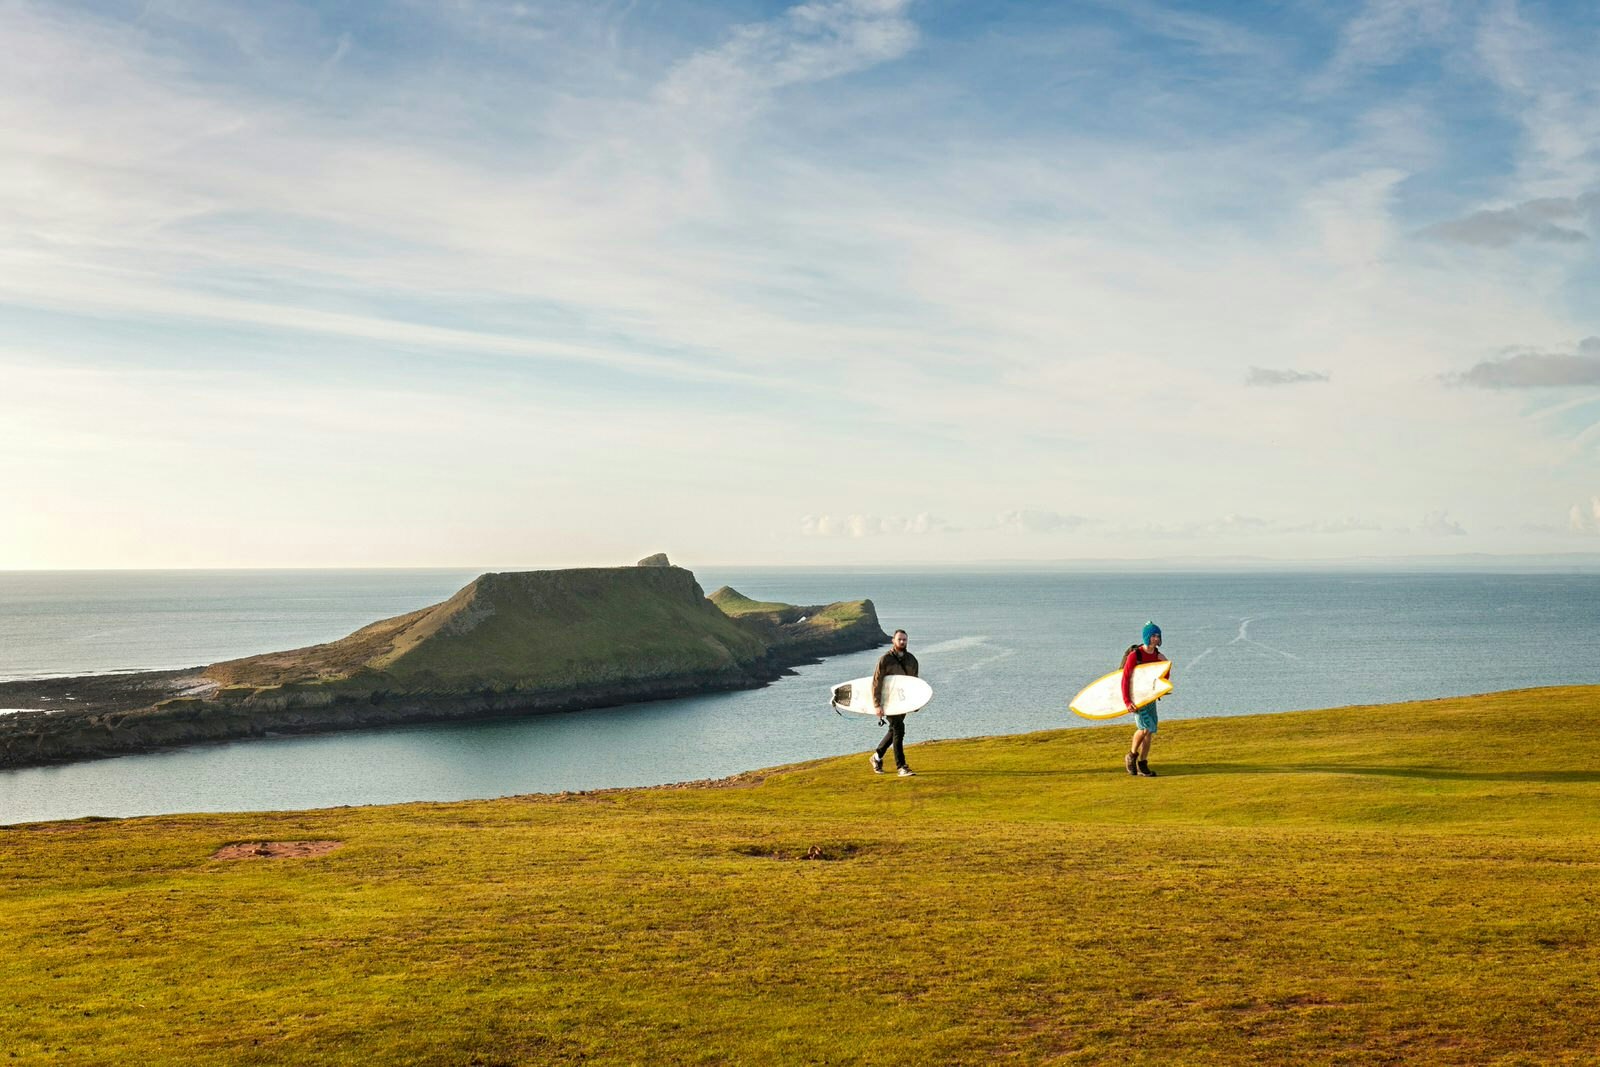 Surfers return from the water on Wales's Gower Peninsula, with Worm's Head in the background © VisitWales